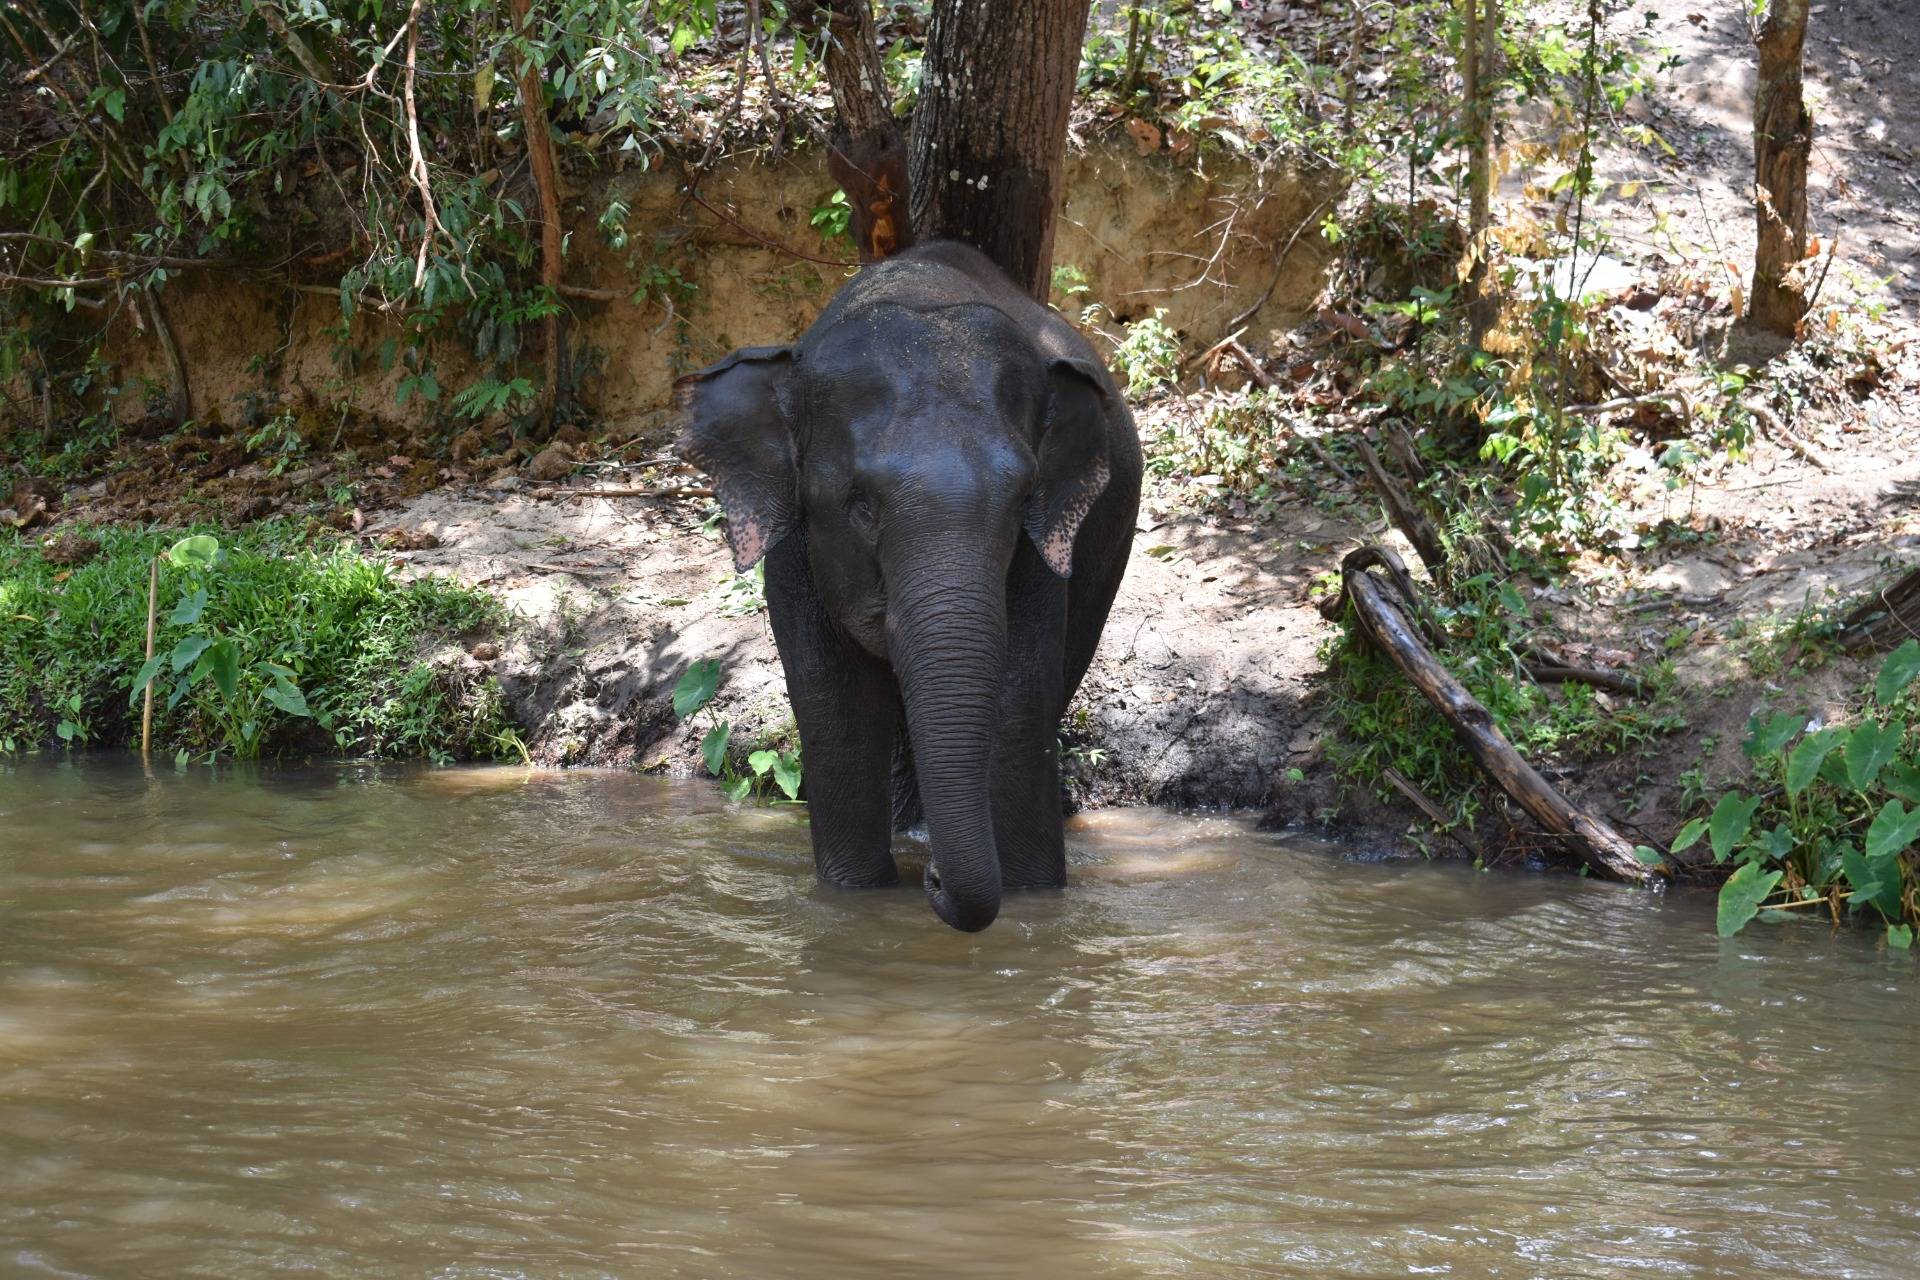 Elephants and rivers: a typical scene in north of Thailand 